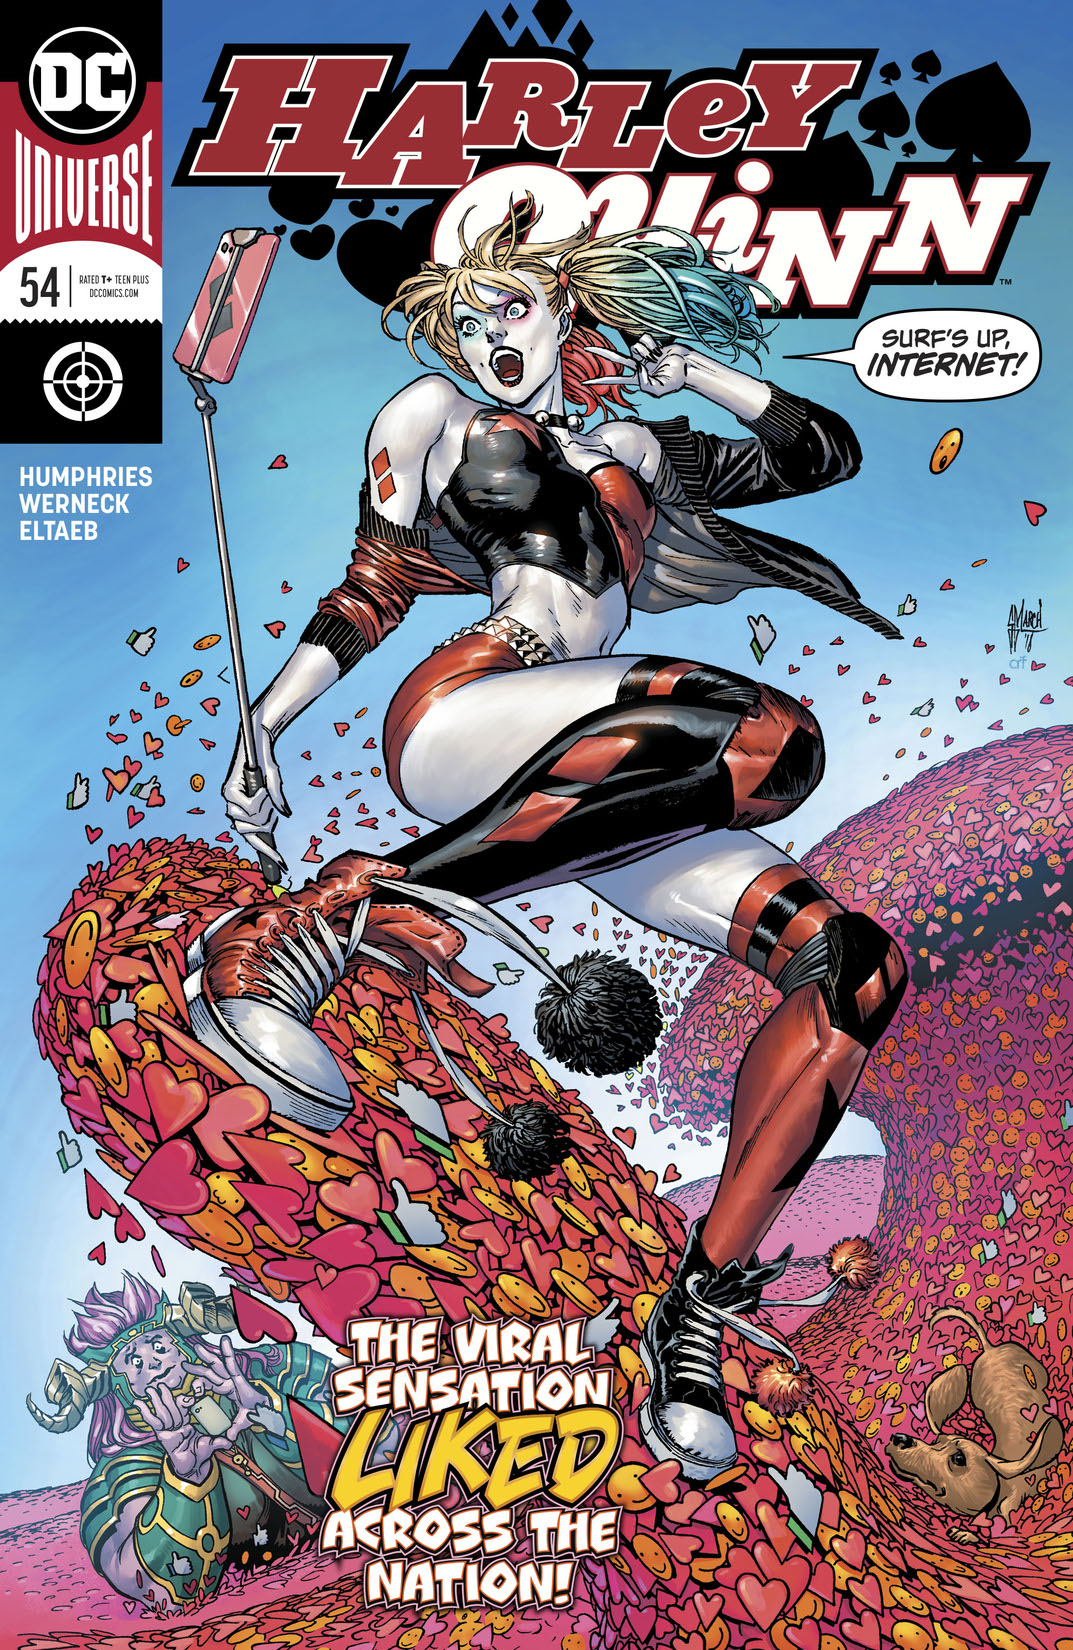 Harley Quinn (2016-) #54 preview images